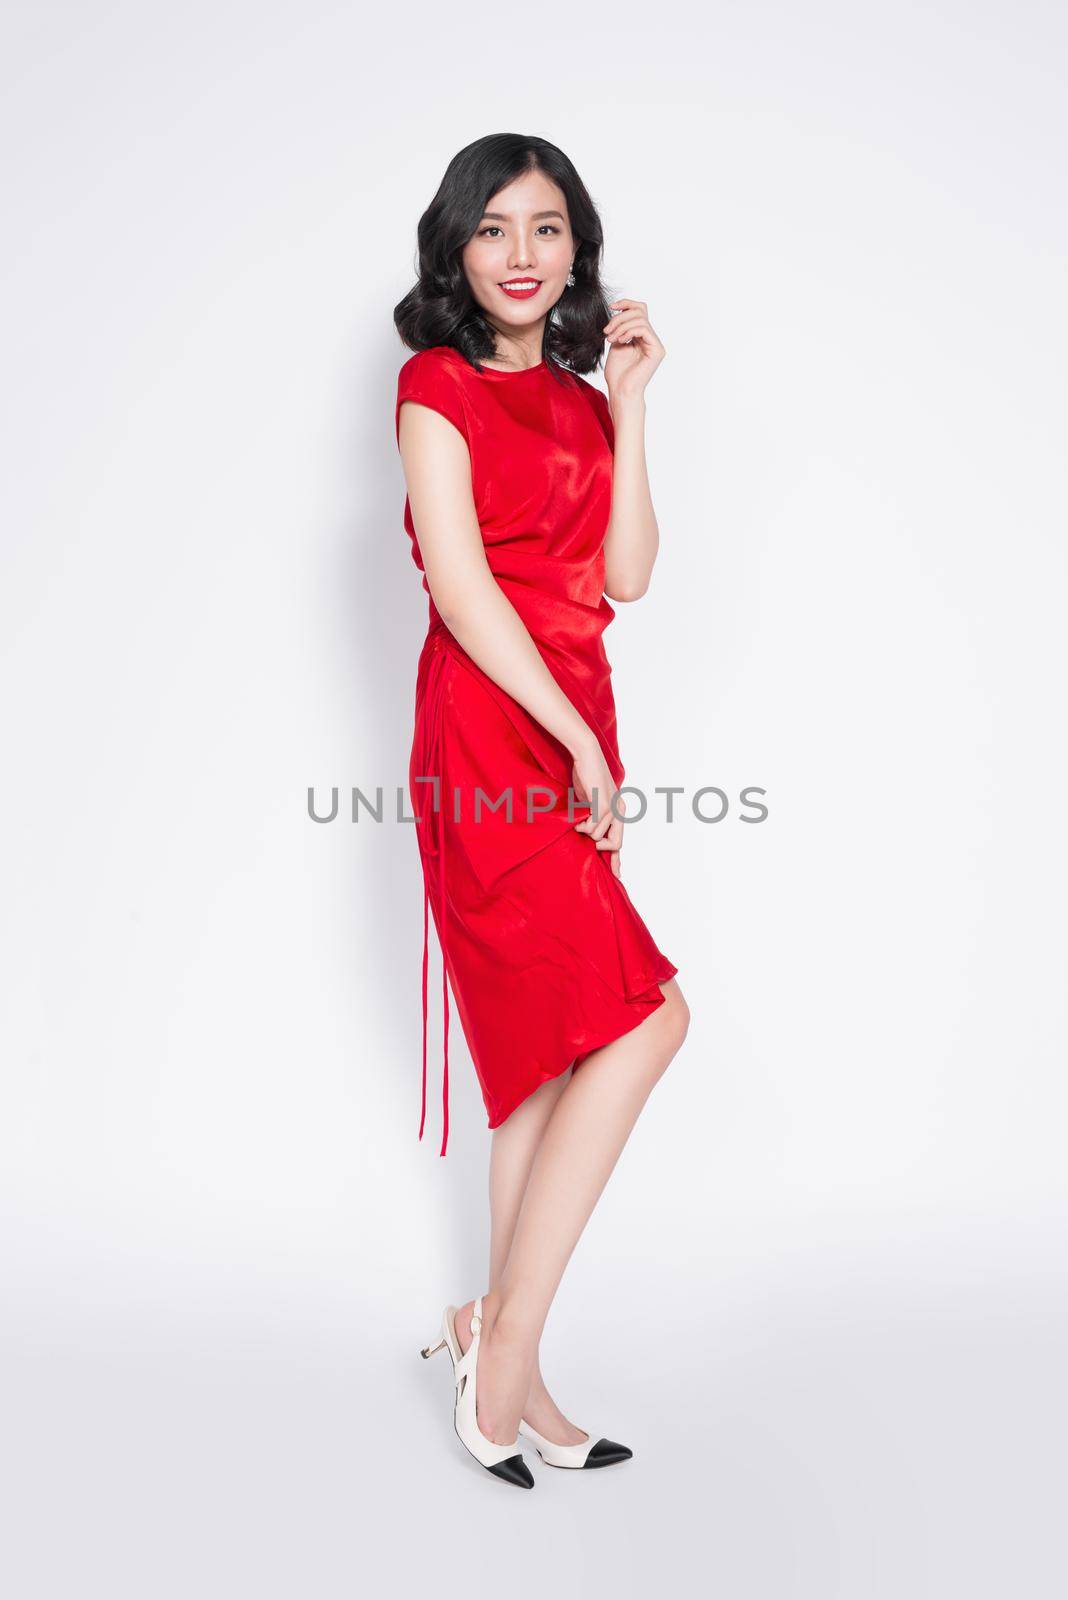 Amazing luxury asian woman in stylish red party dress